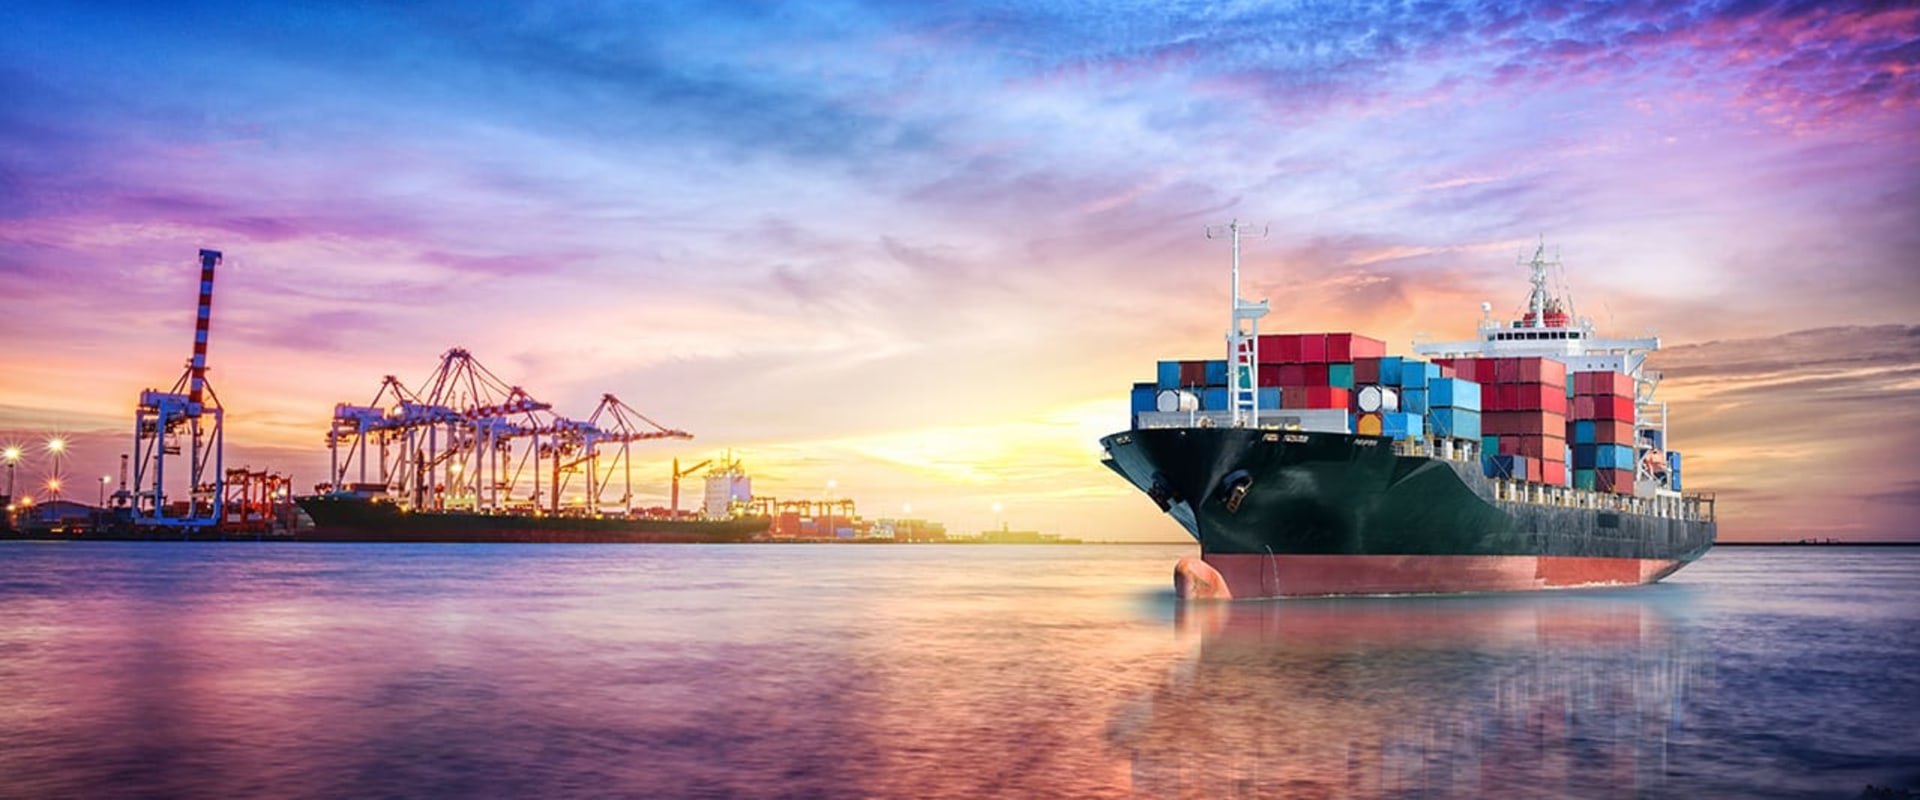 Choosing the Right Insurance for Your LCL Shipment